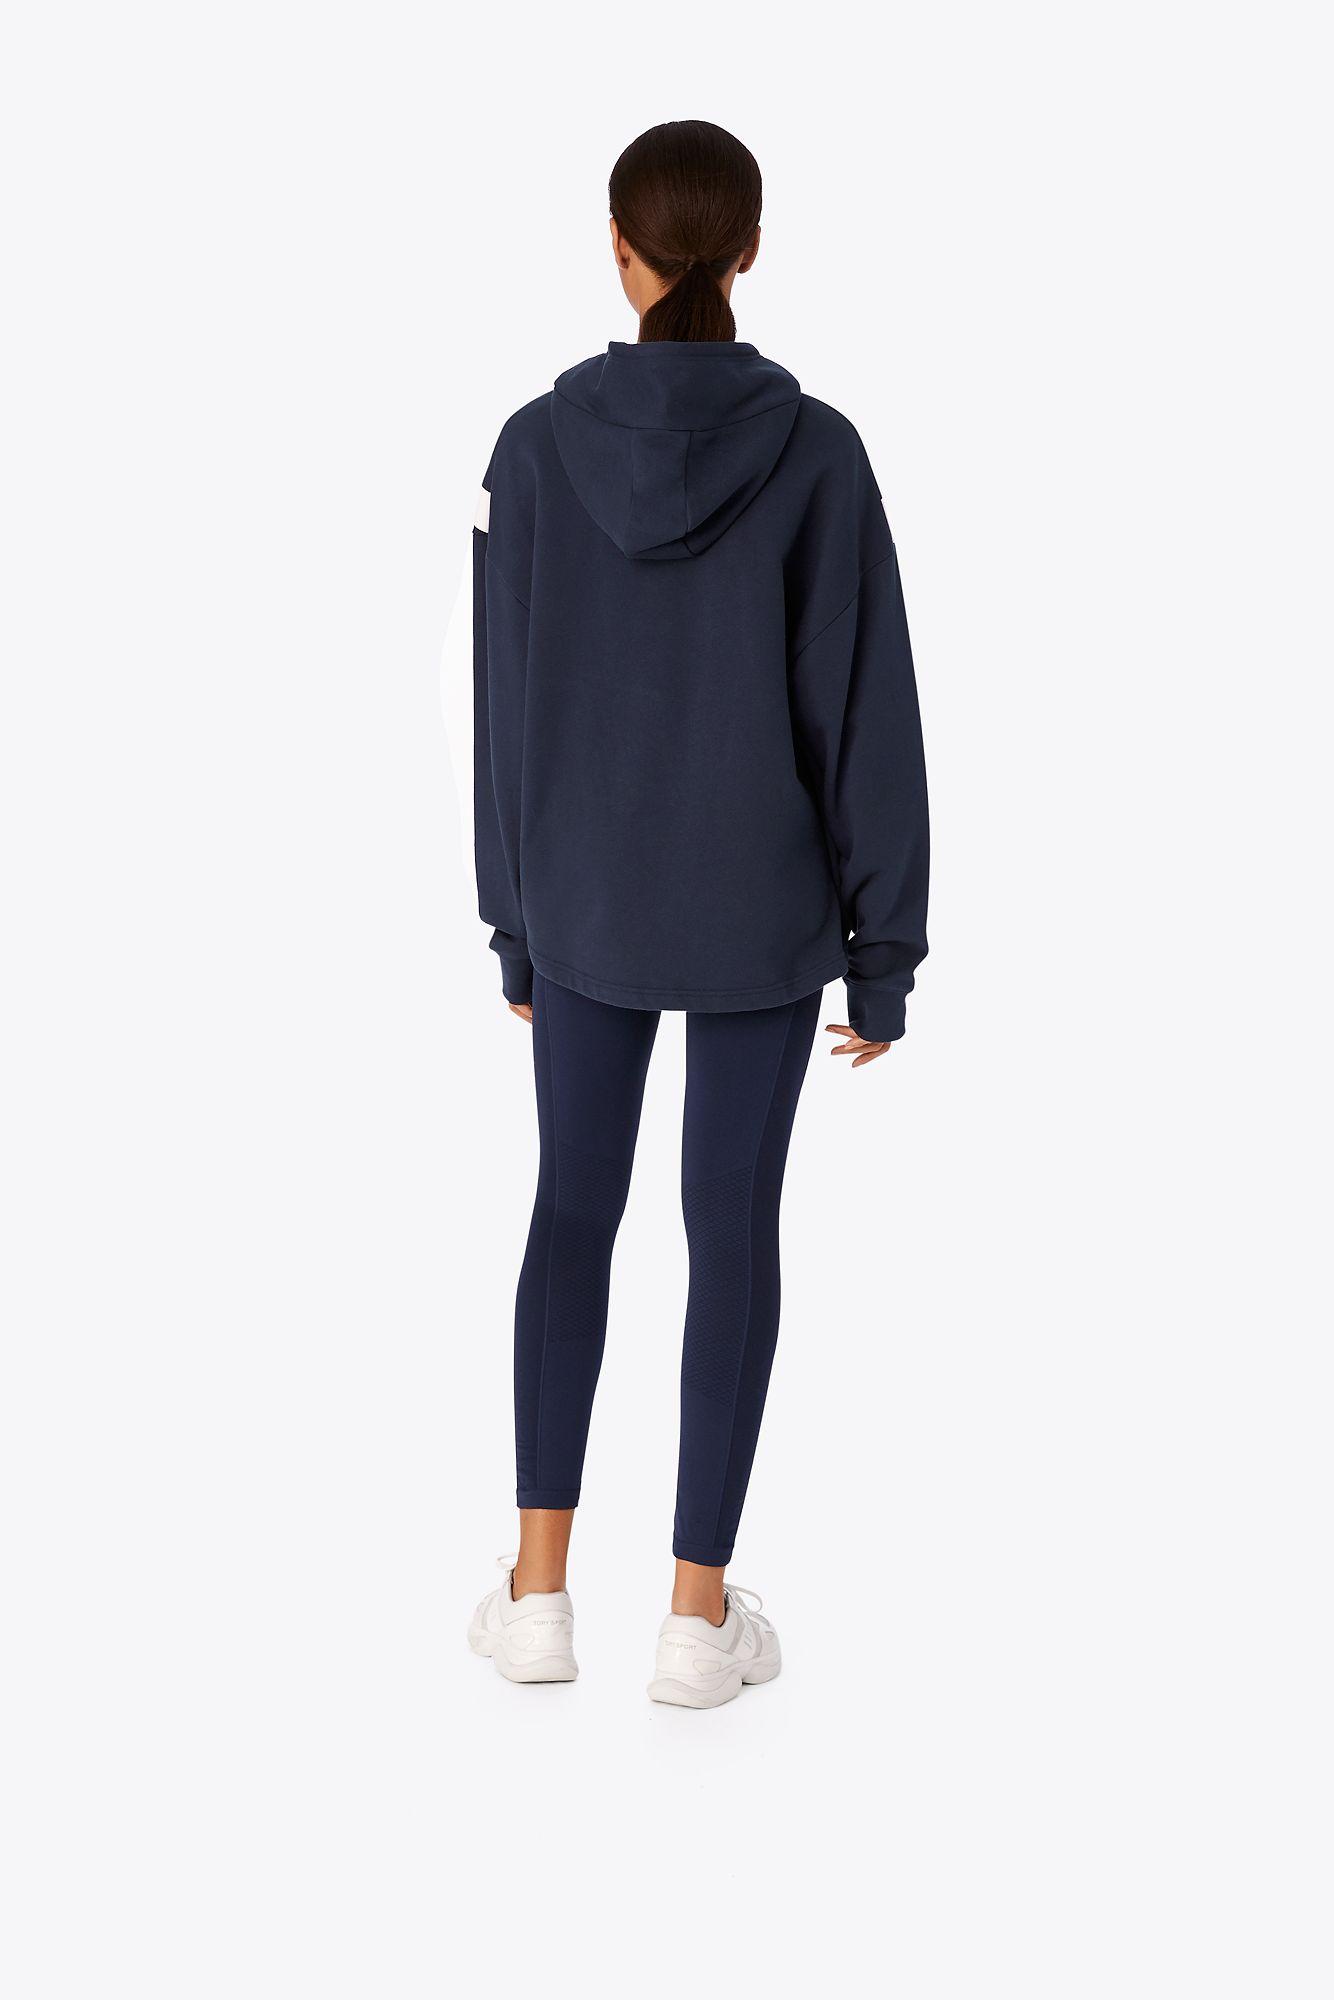 Tory Sport Cotton Chevron French Terry Hoodie in Blue | Lyst